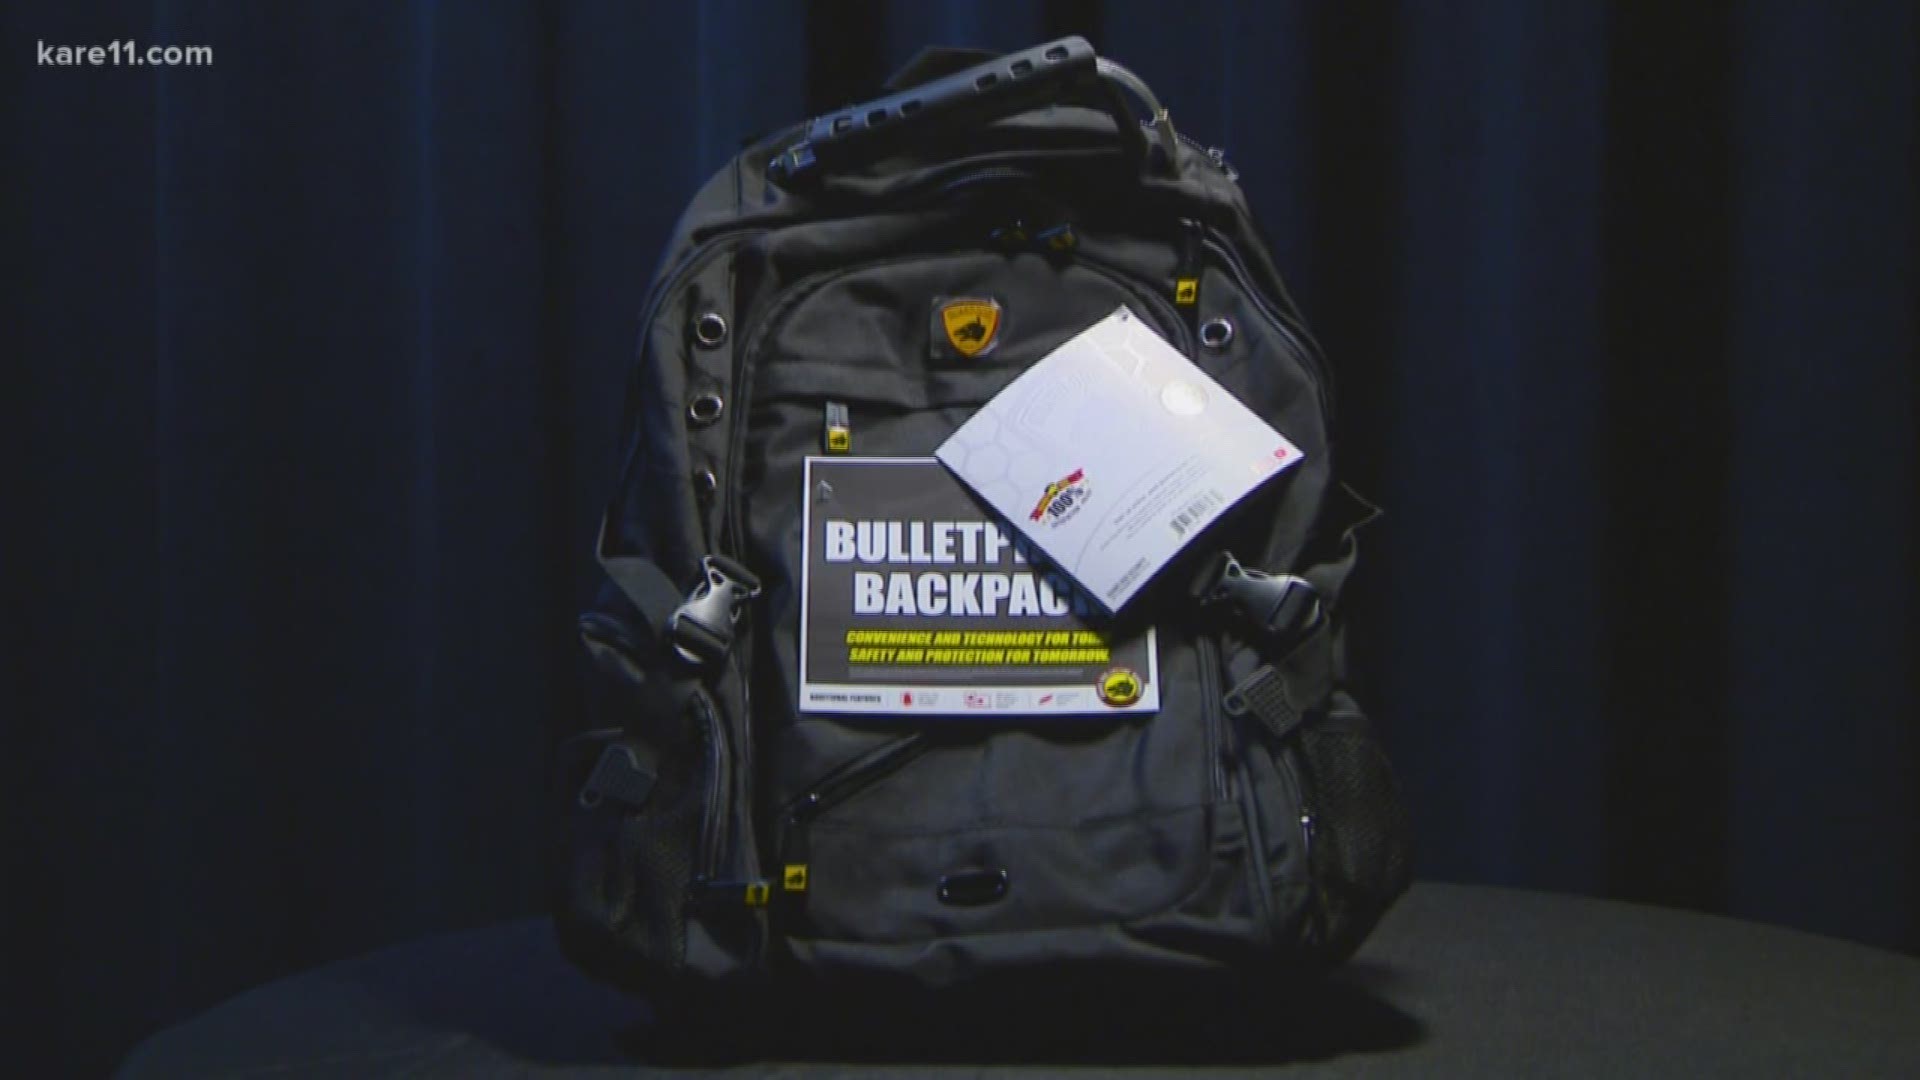 "Bulletproof backpacks" went on sale this week at an Office Max in Inver Grove Heights. Would you purchase one for your children? Will these make children feel safer? https://kare11.tv/2P9jArd